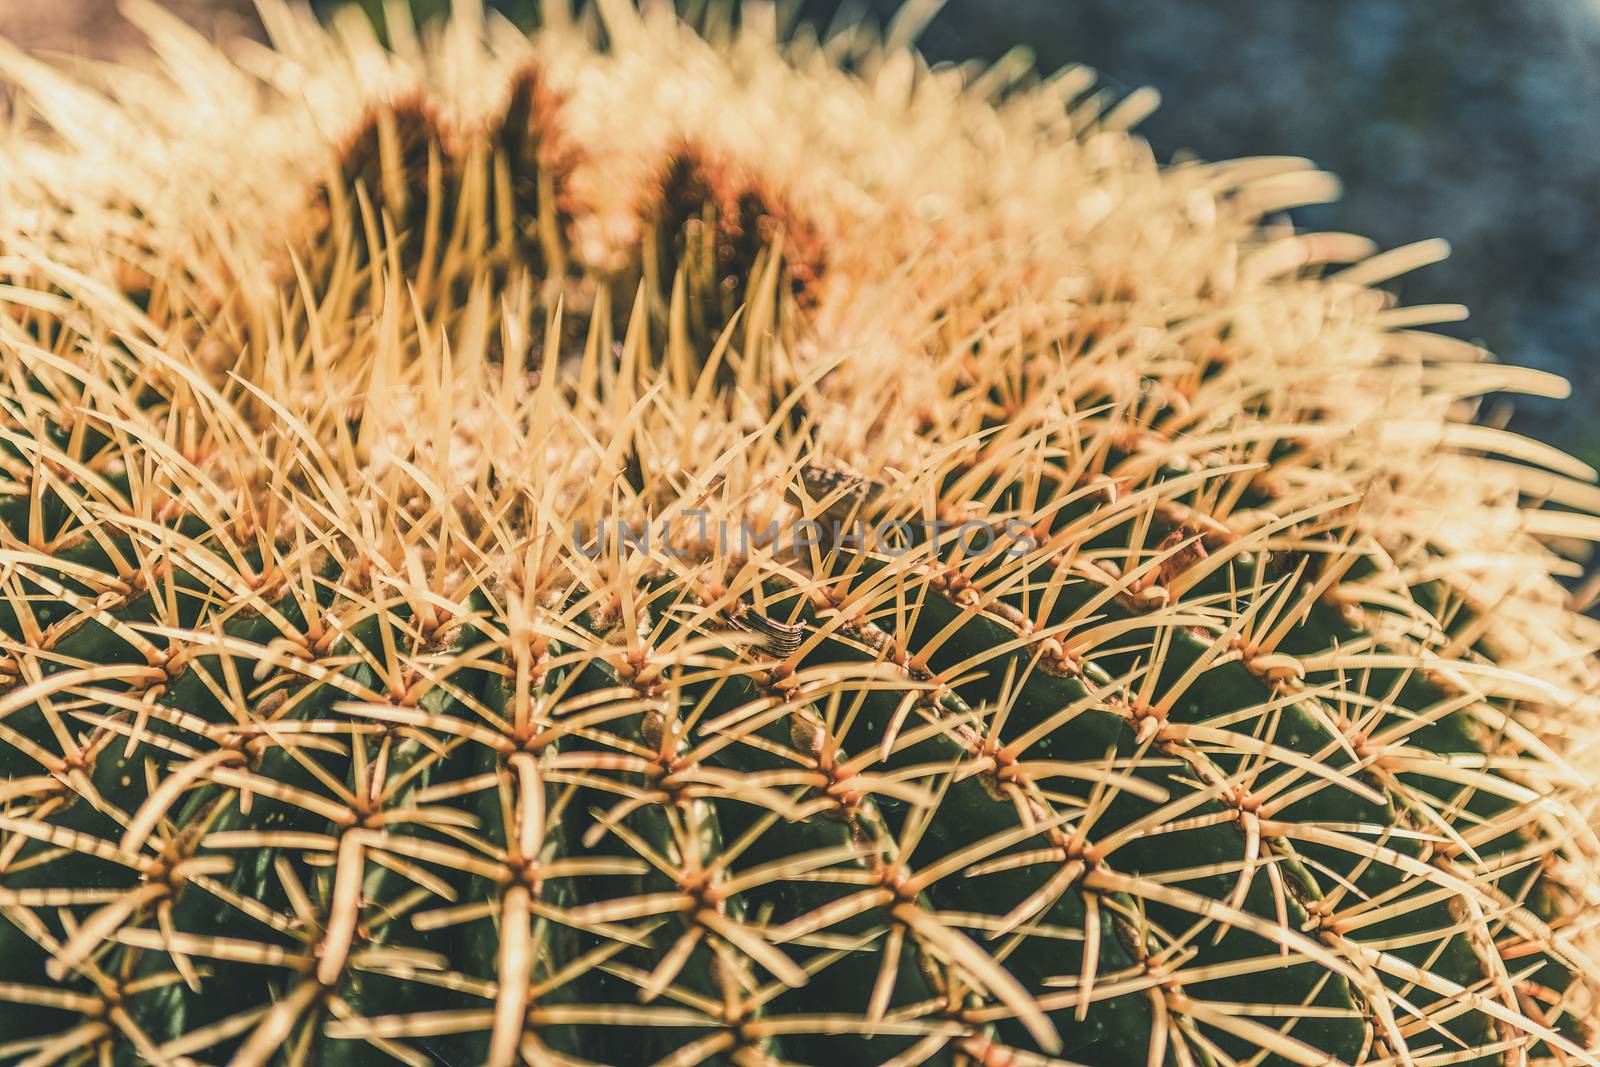 Closeup of a Golden Barrel cactus with spike thorns in a desert garden, Echinocactus Grusonii, copy space for text